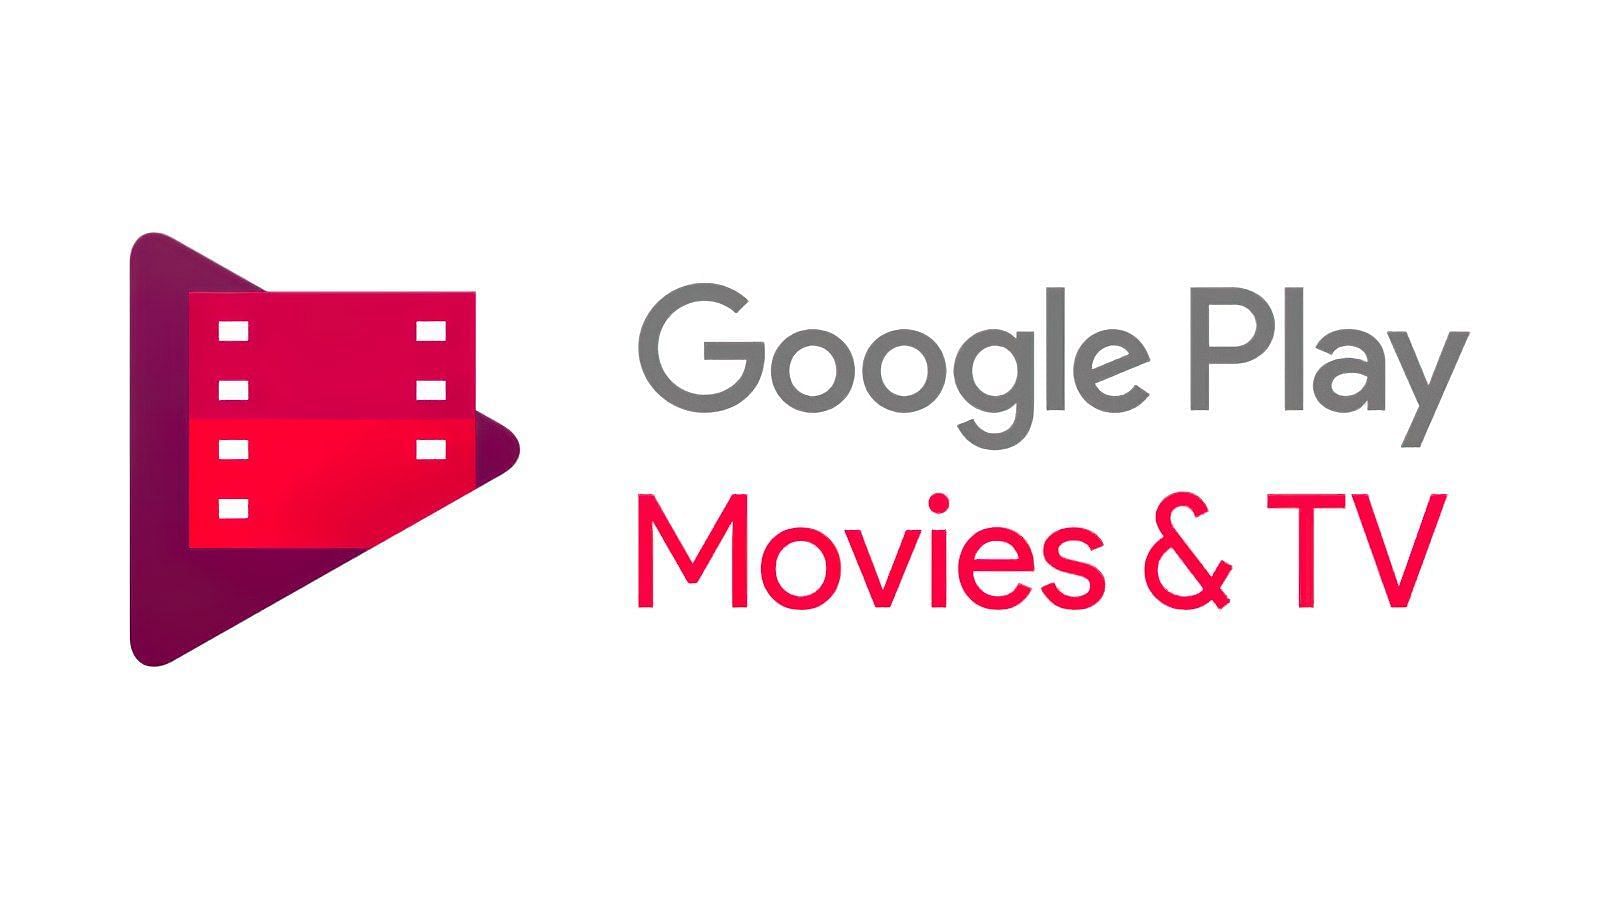 Google Play Movies &amp; TV is a great streaming platform to watch Ant-Man and the Wasp(Image via Google Play)